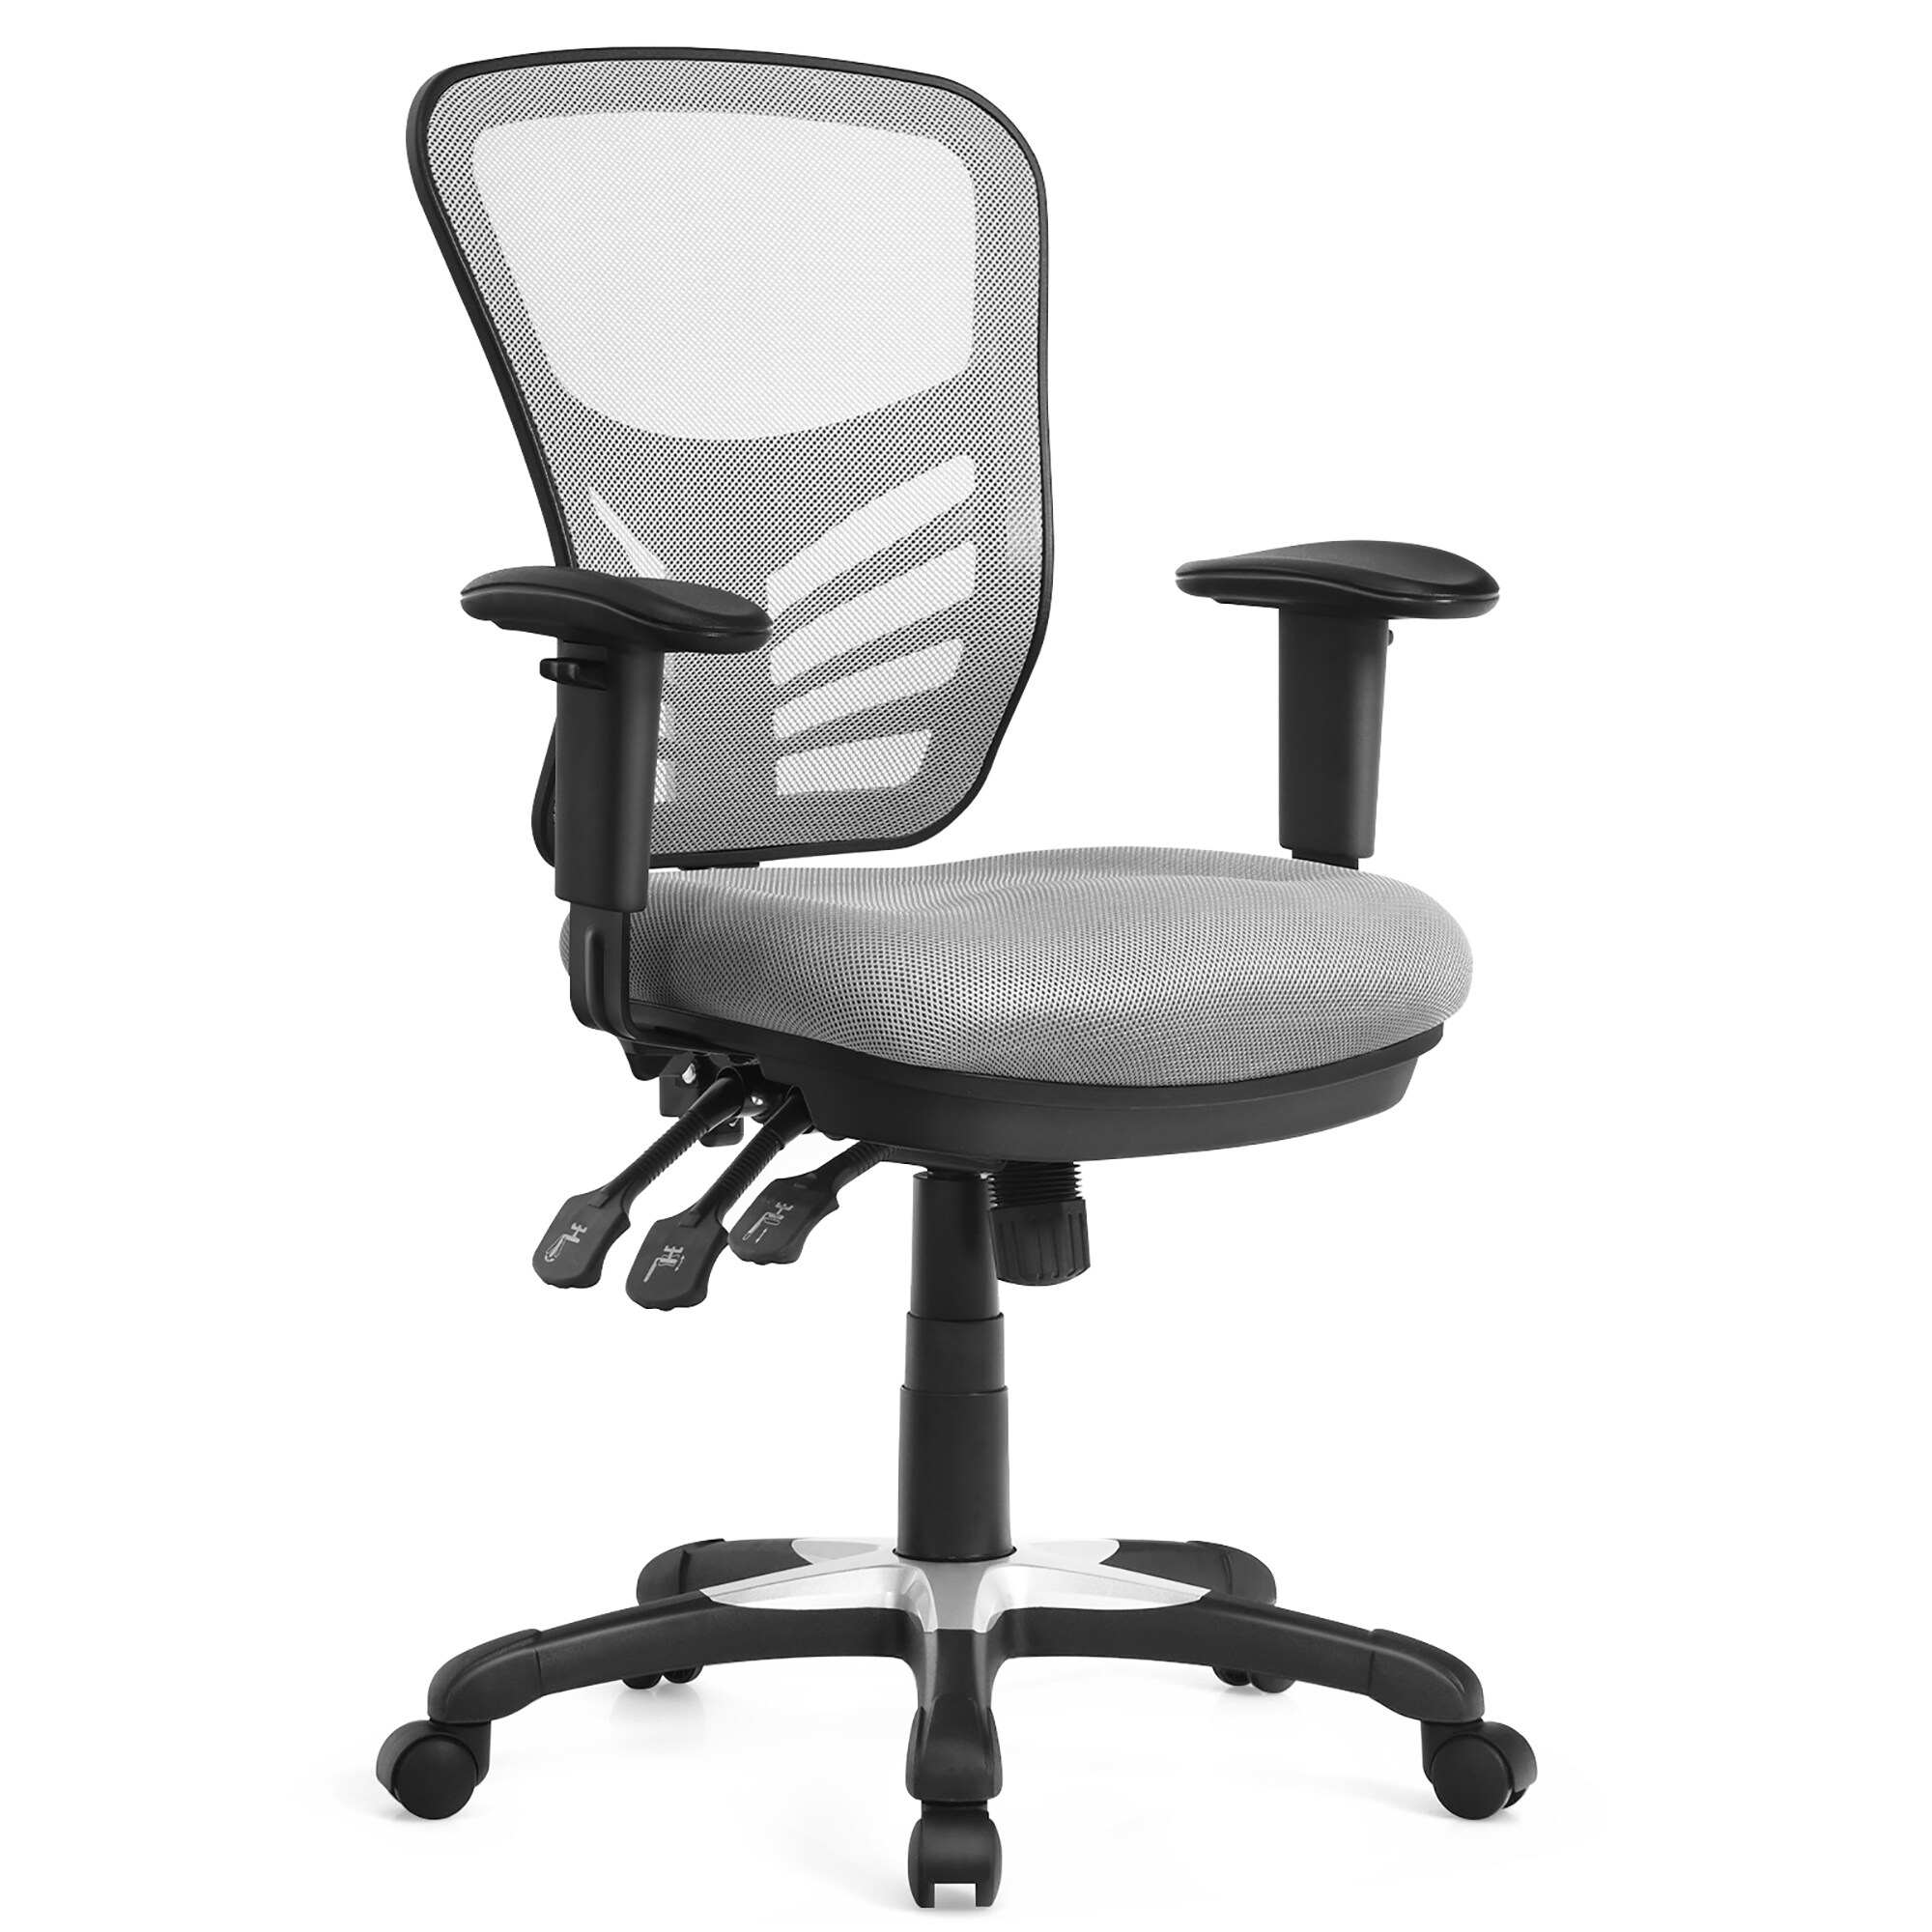 https://ak1.ostkcdn.com/images/products/is/images/direct/3421dbfa36e7b92c6fbdf272c10b09f60927621e/Costway-Mesh-Office-Chair-3-Paddle-Computer-Desk-Chair-w--Adjustable.jpg